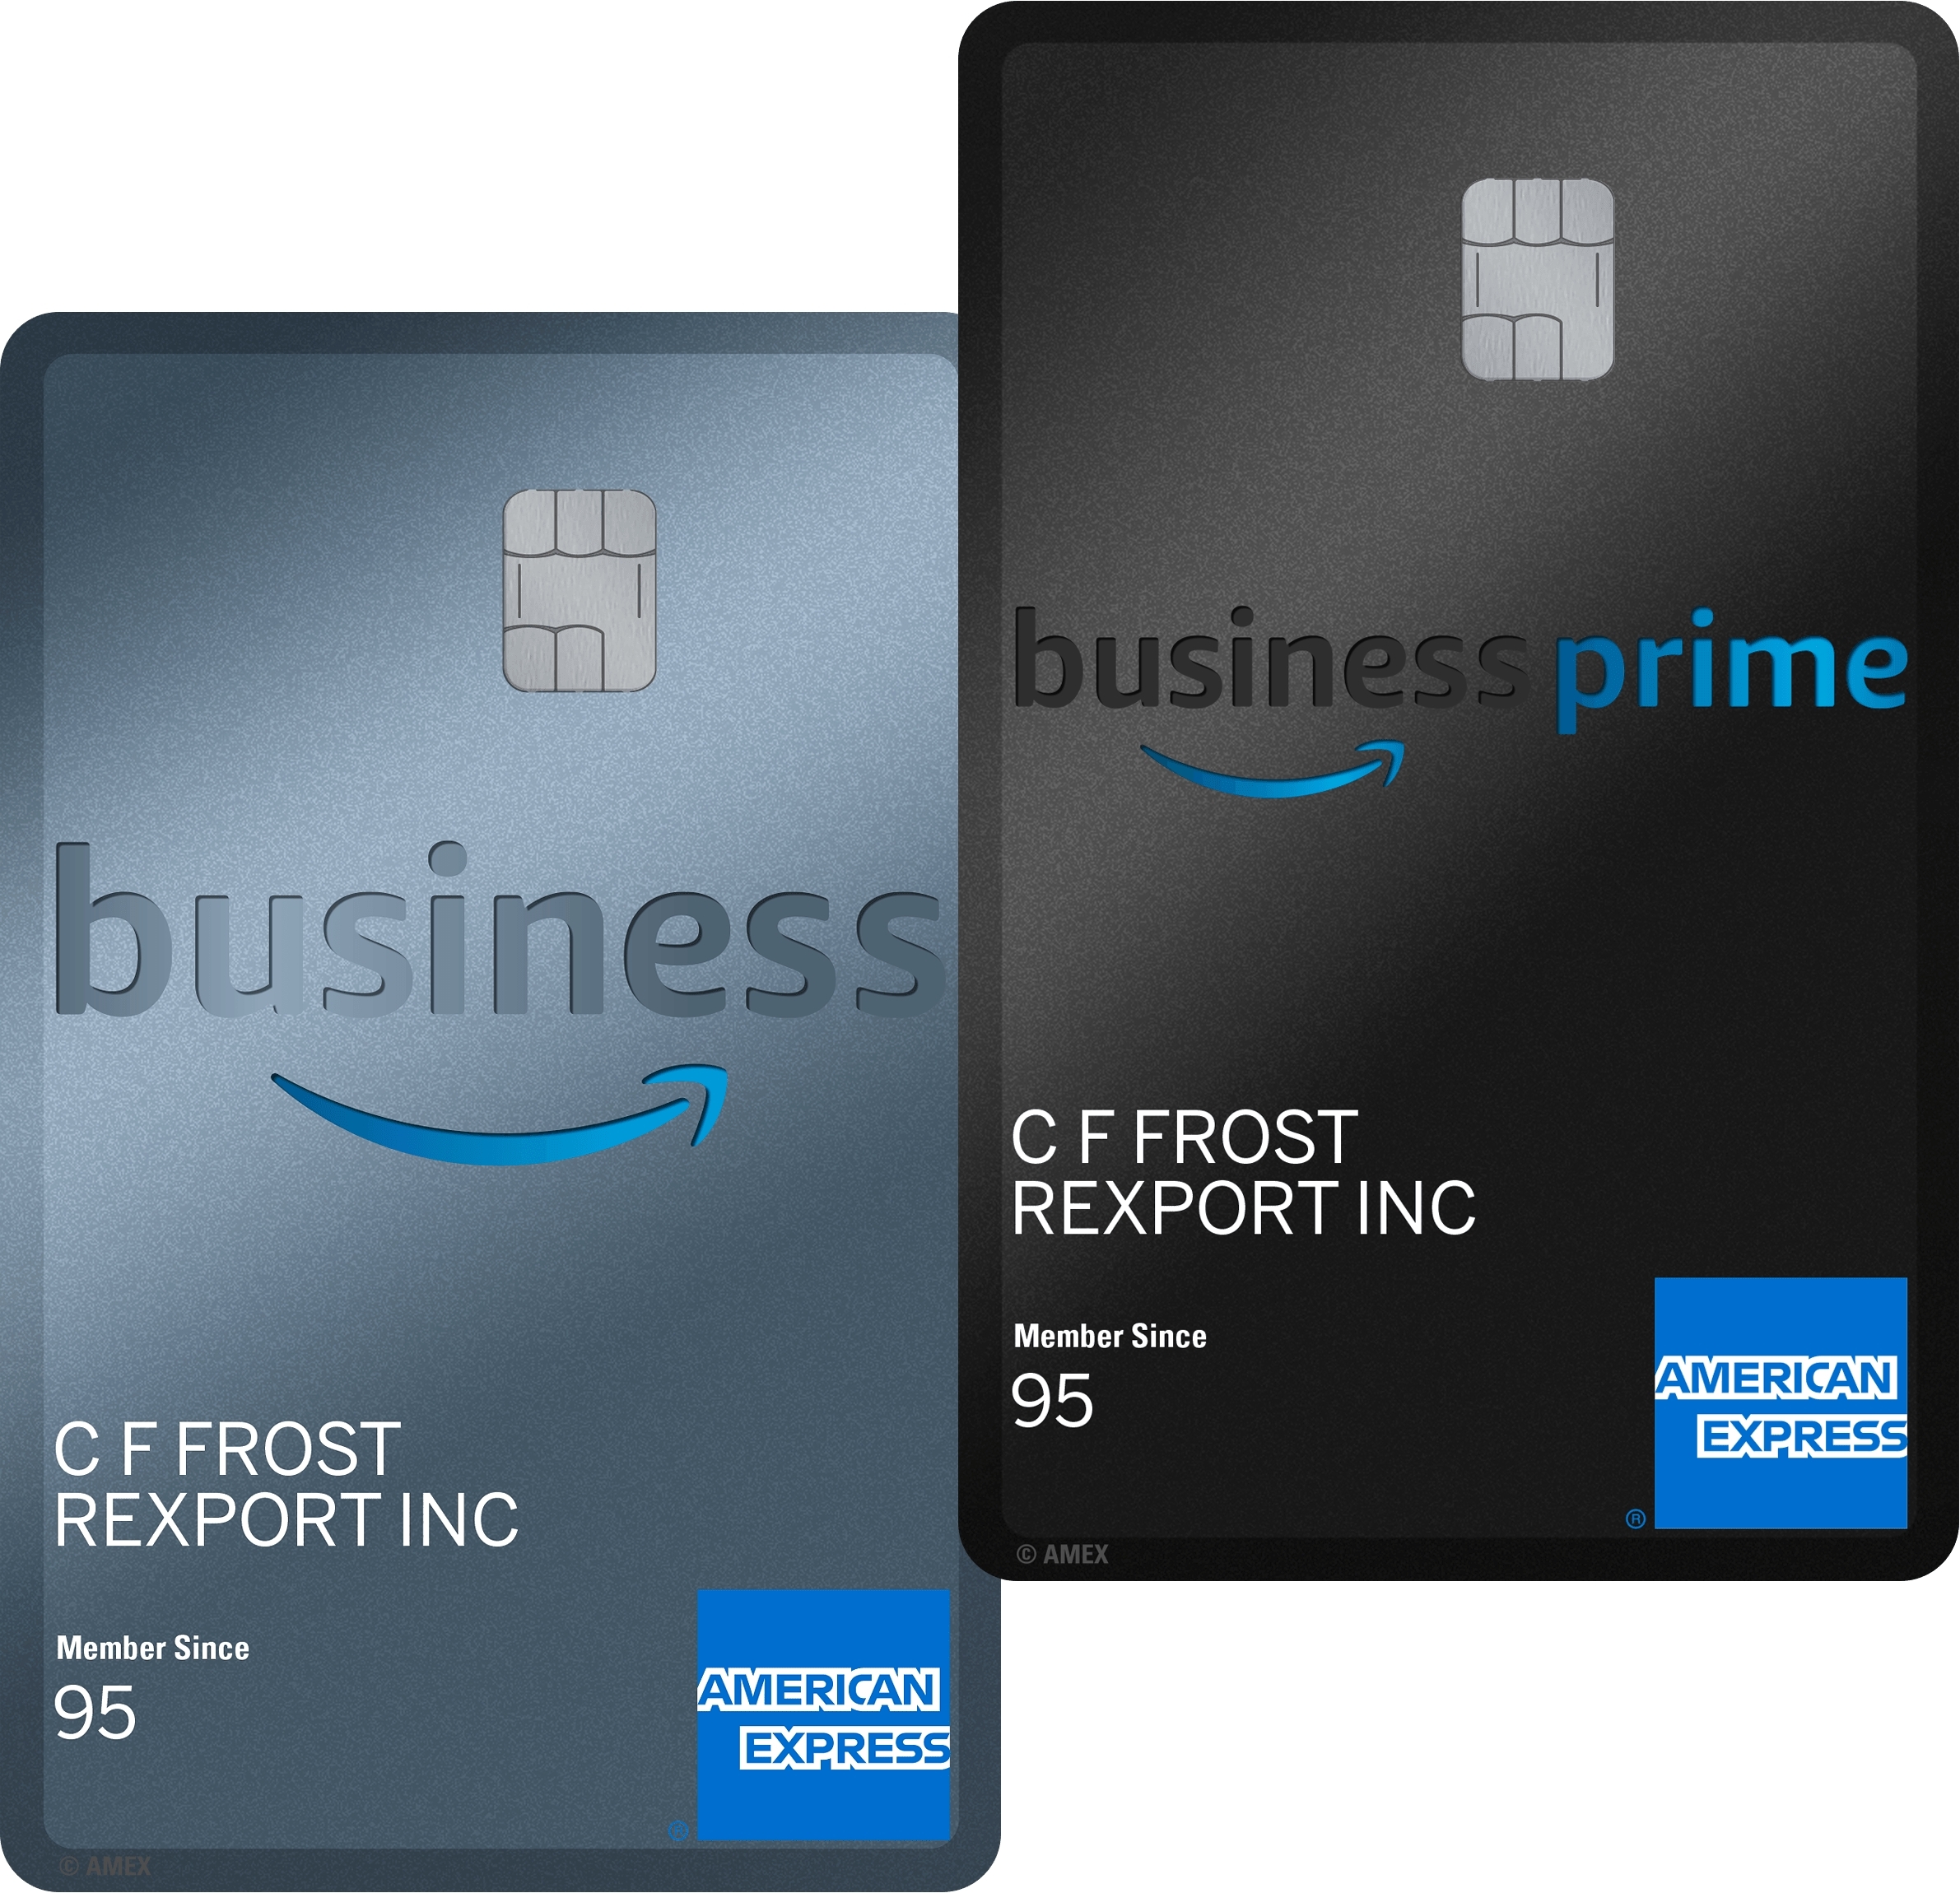 10 Best Business Credit Cards for Amazon Purchases